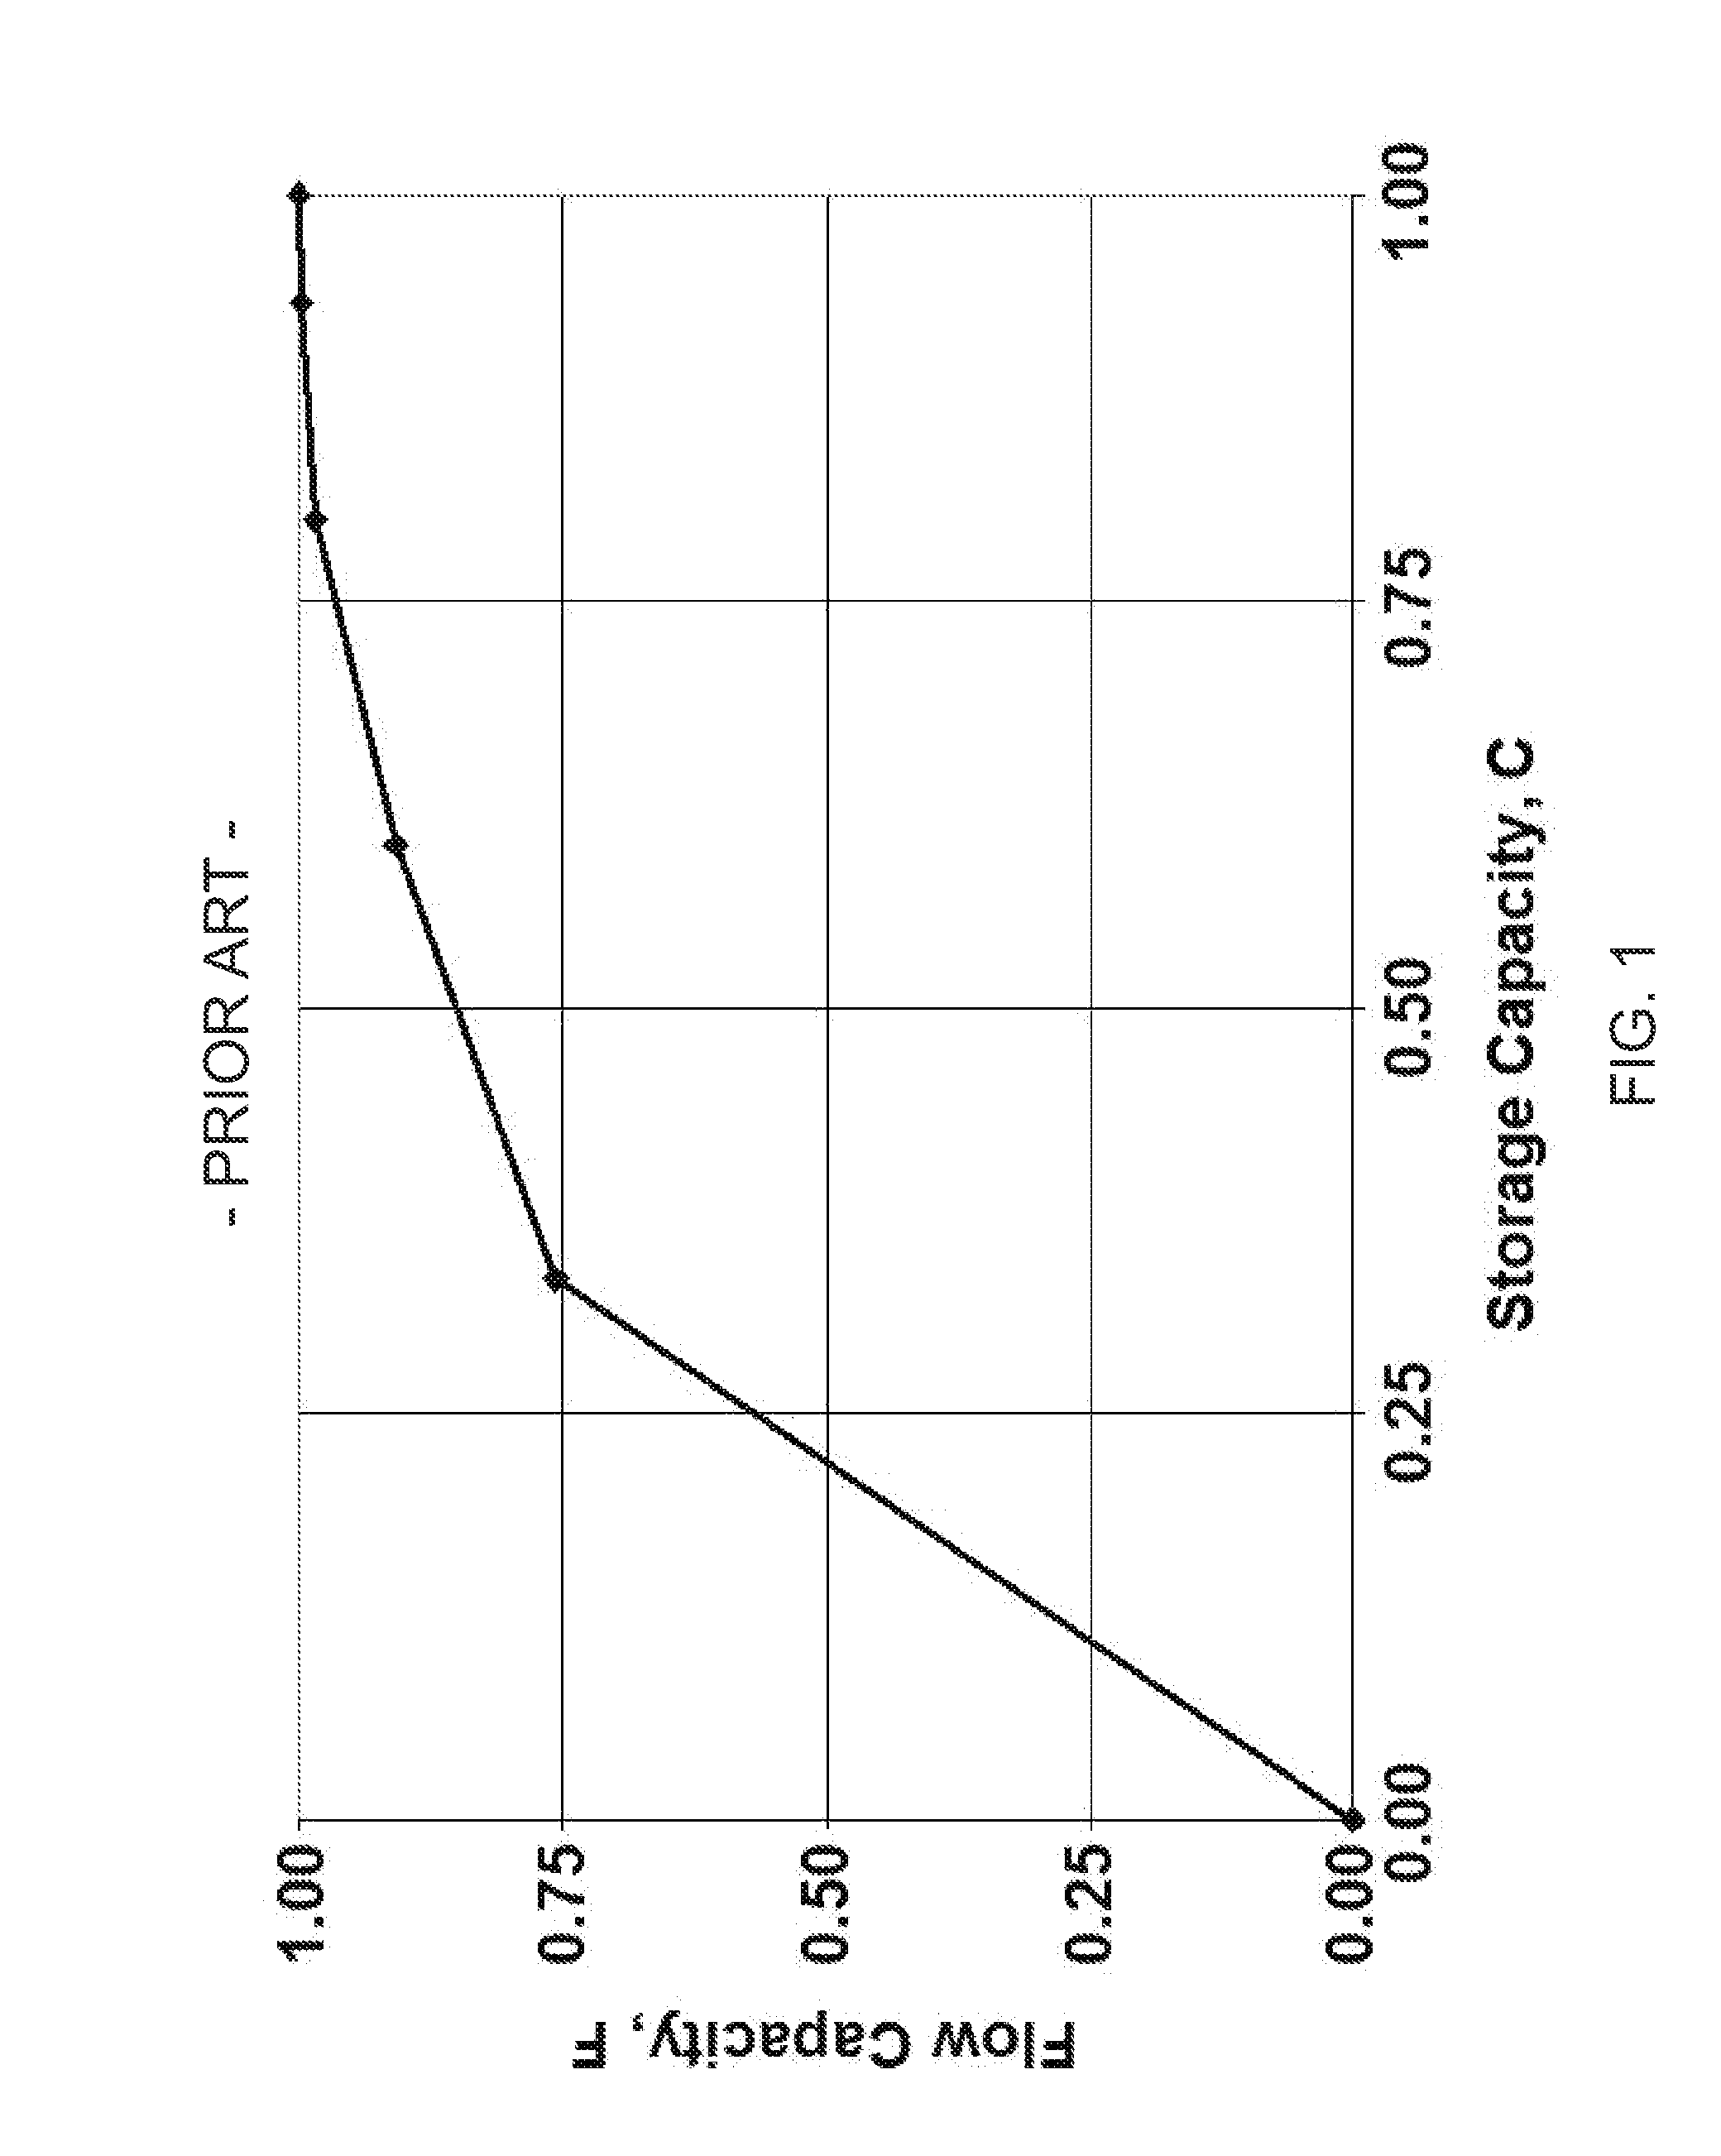 System and method for evaluating dynamic heterogeneity in earth models